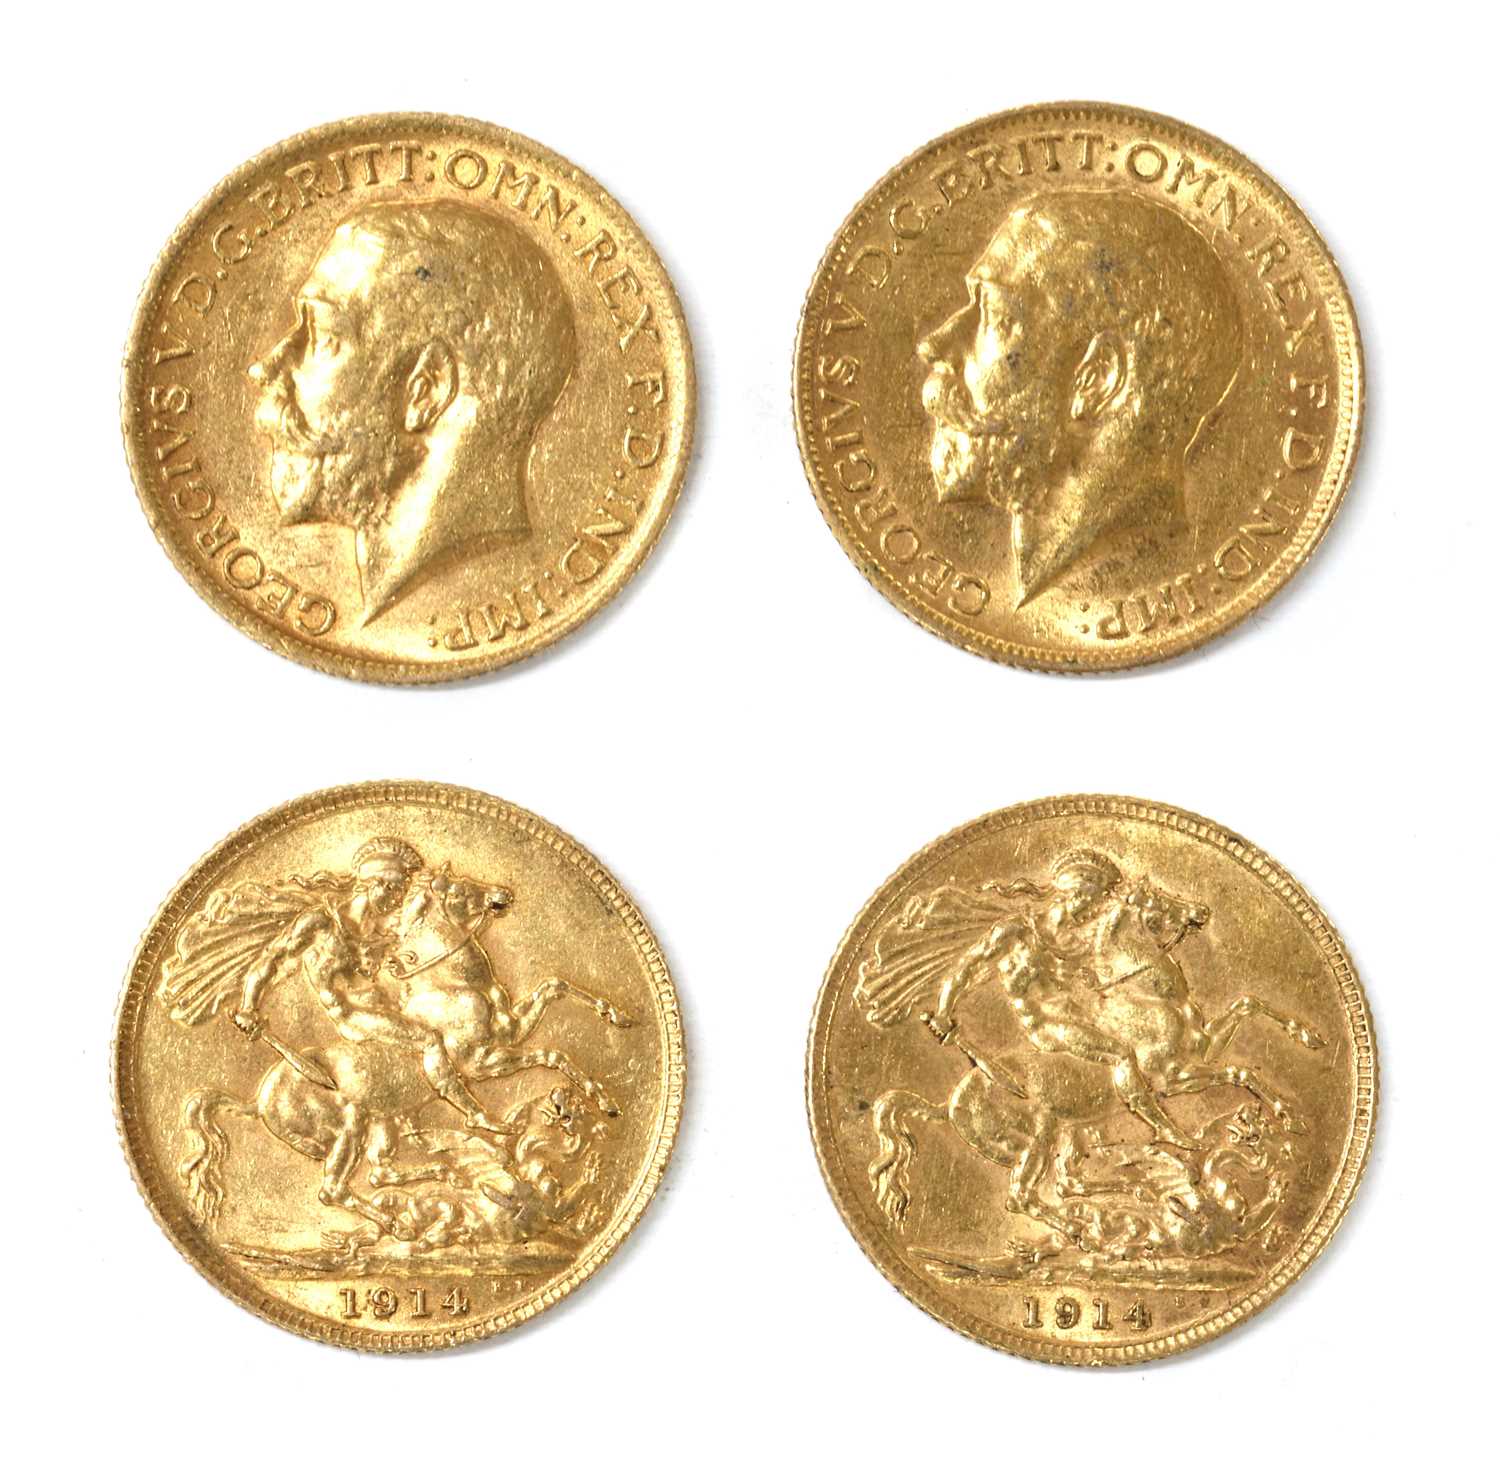 Lot 56 - Coins, Great Britain, George V (1910-1936)